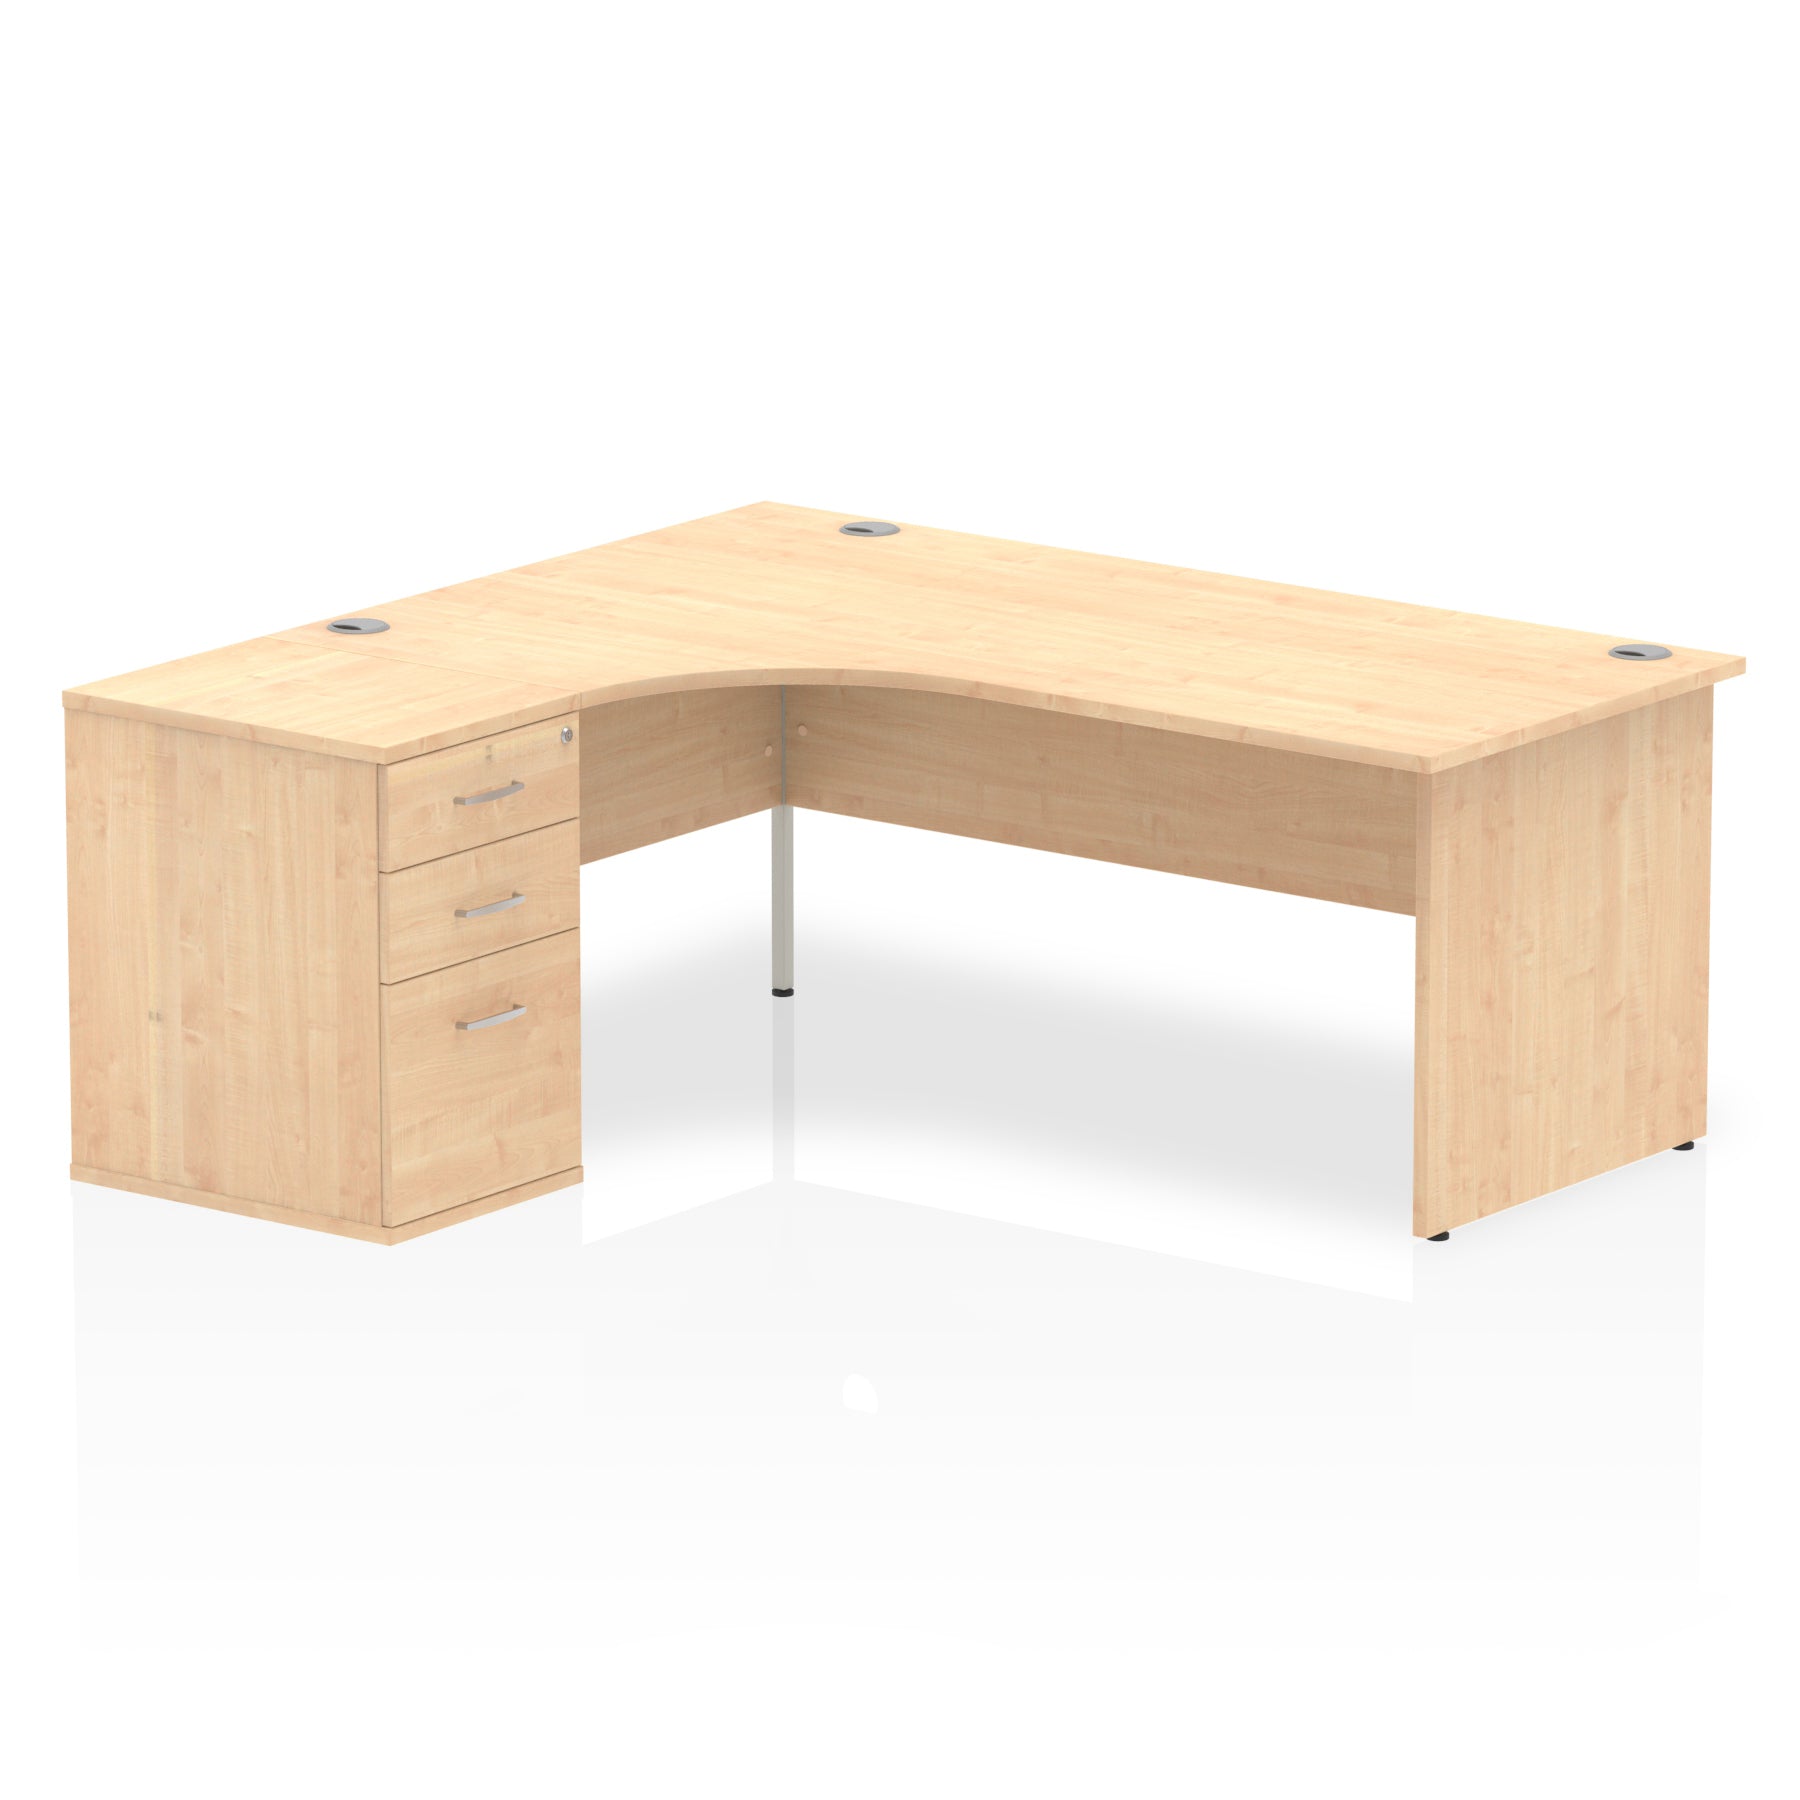 Impulse Panel End Crescent Desk Workstation - 1600/1800mm Width, MFC Material, 3 Lockable Drawers, 5-Year Guarantee, Self-Assembly